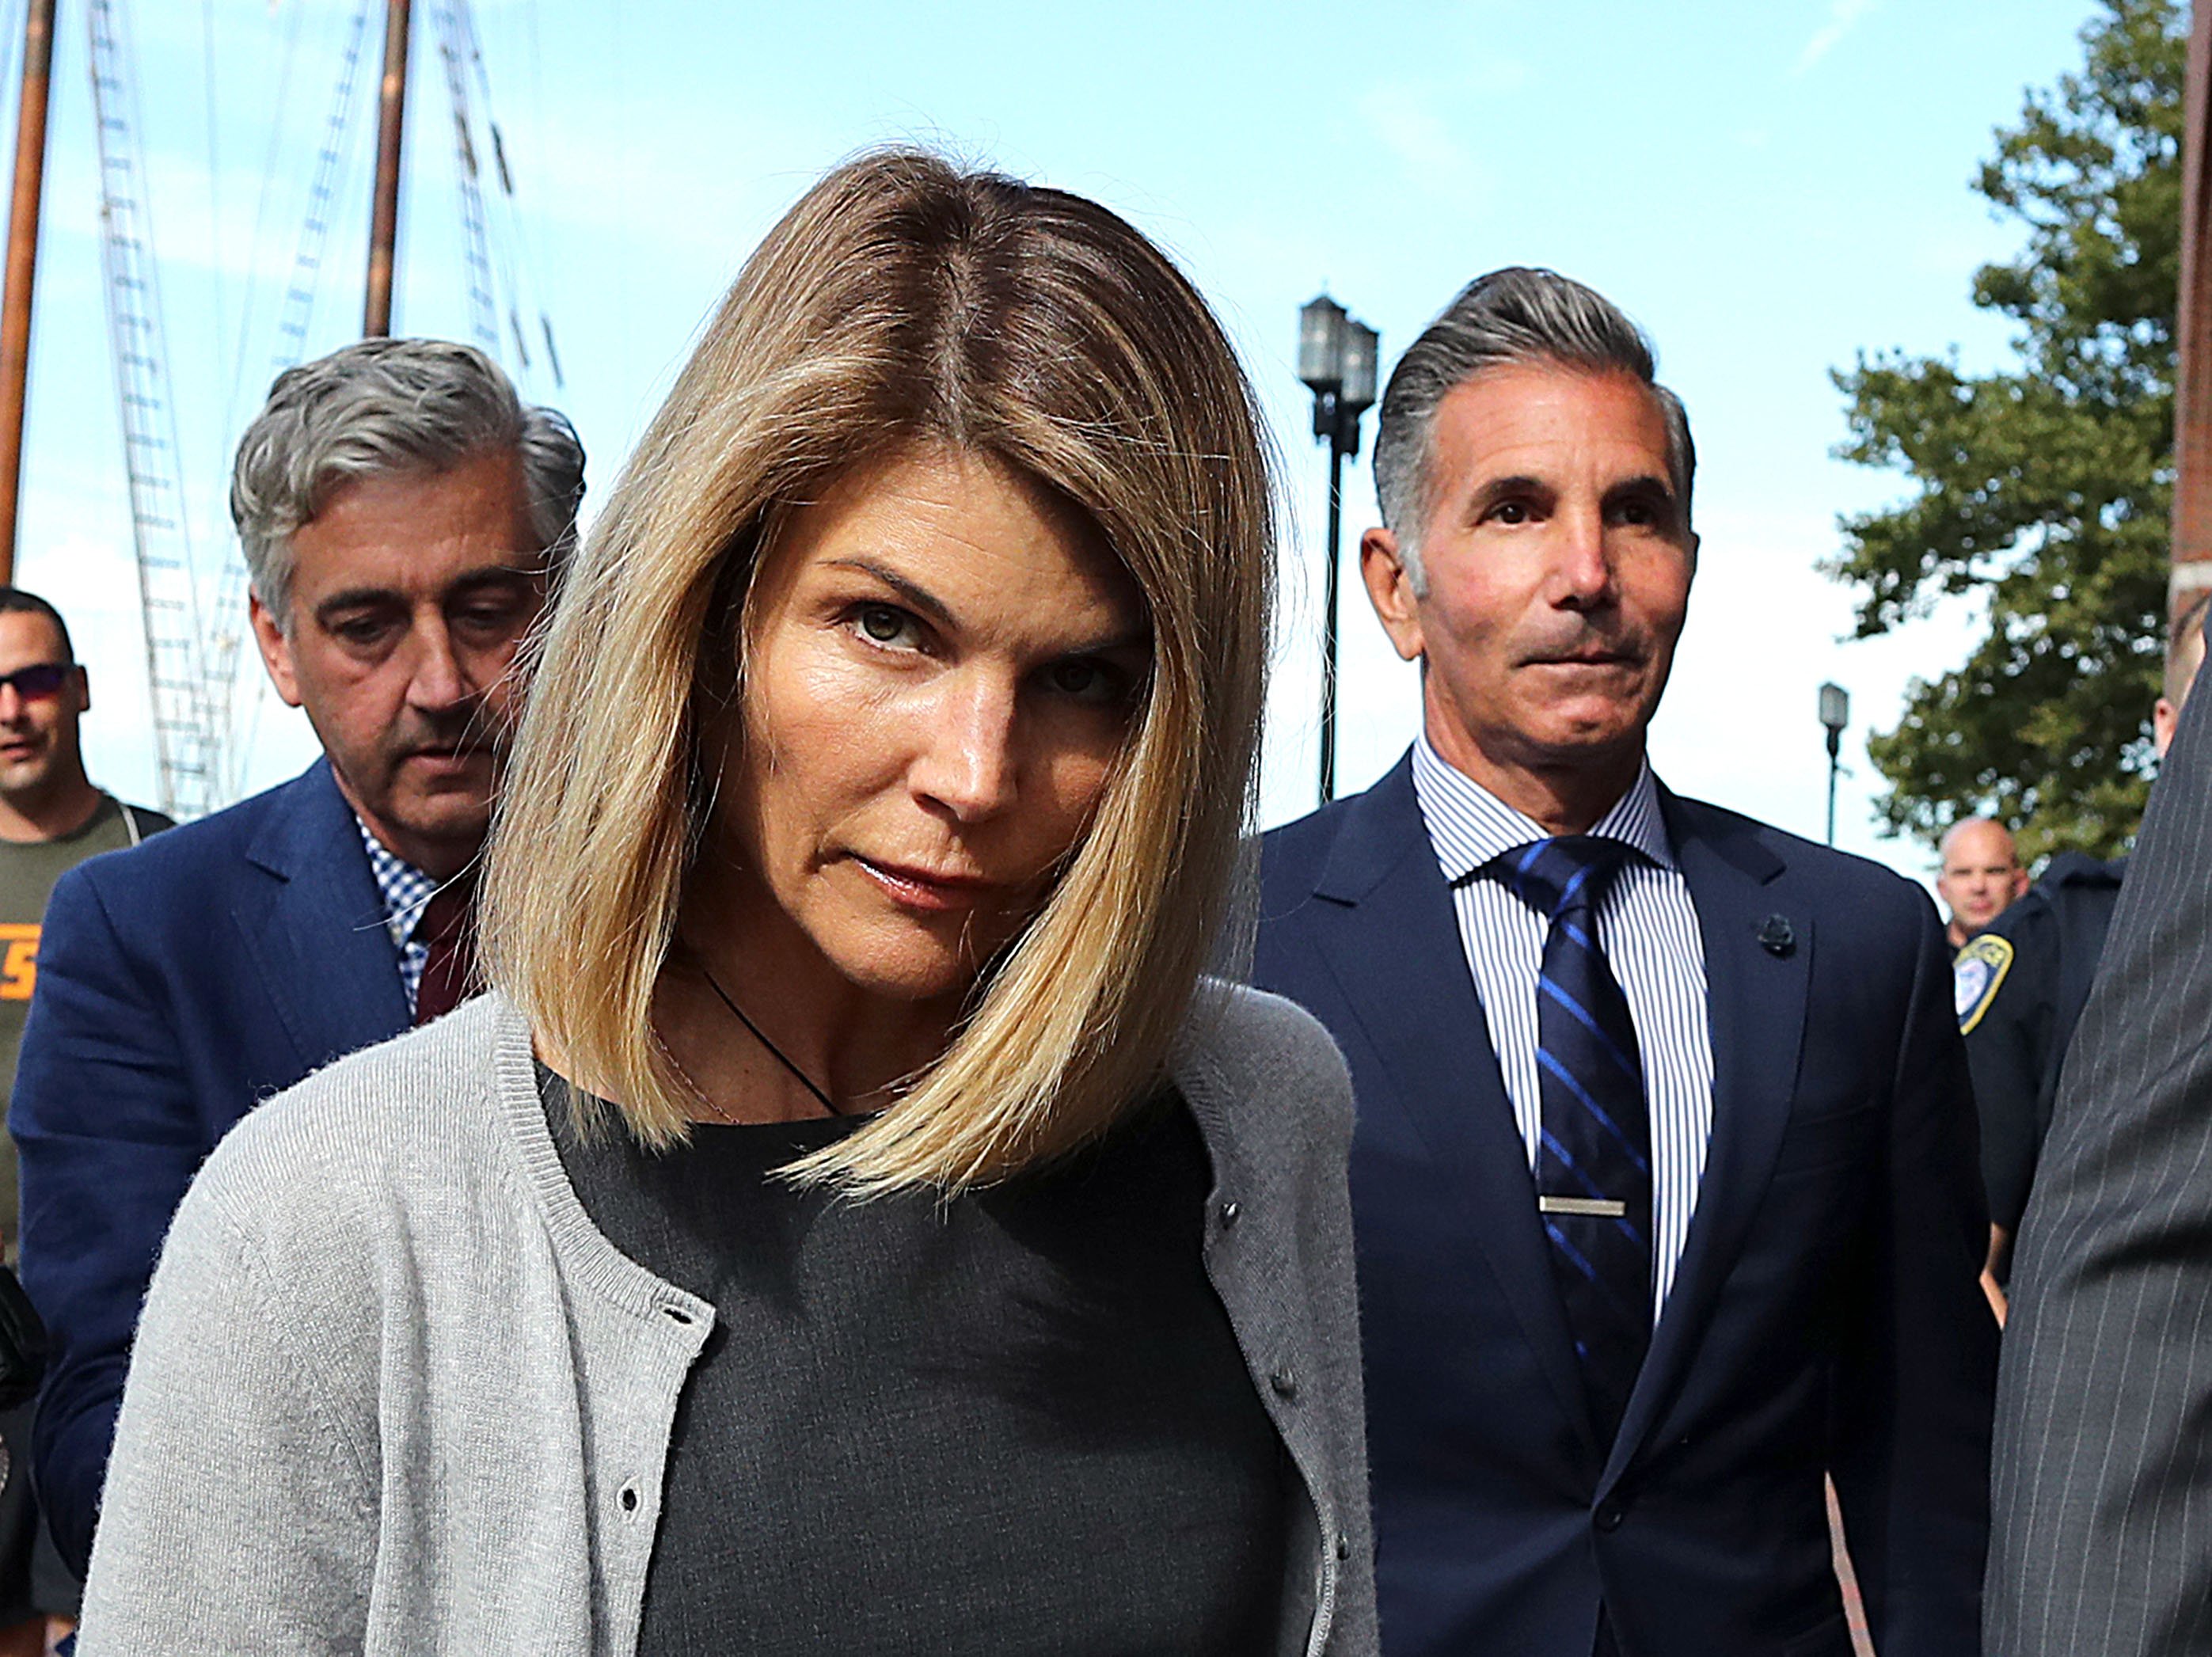 Lori Loughlin and husband Mossimo Giannulli leave a Boston courthouse on August 27, 2019 | Photo: Getty Images